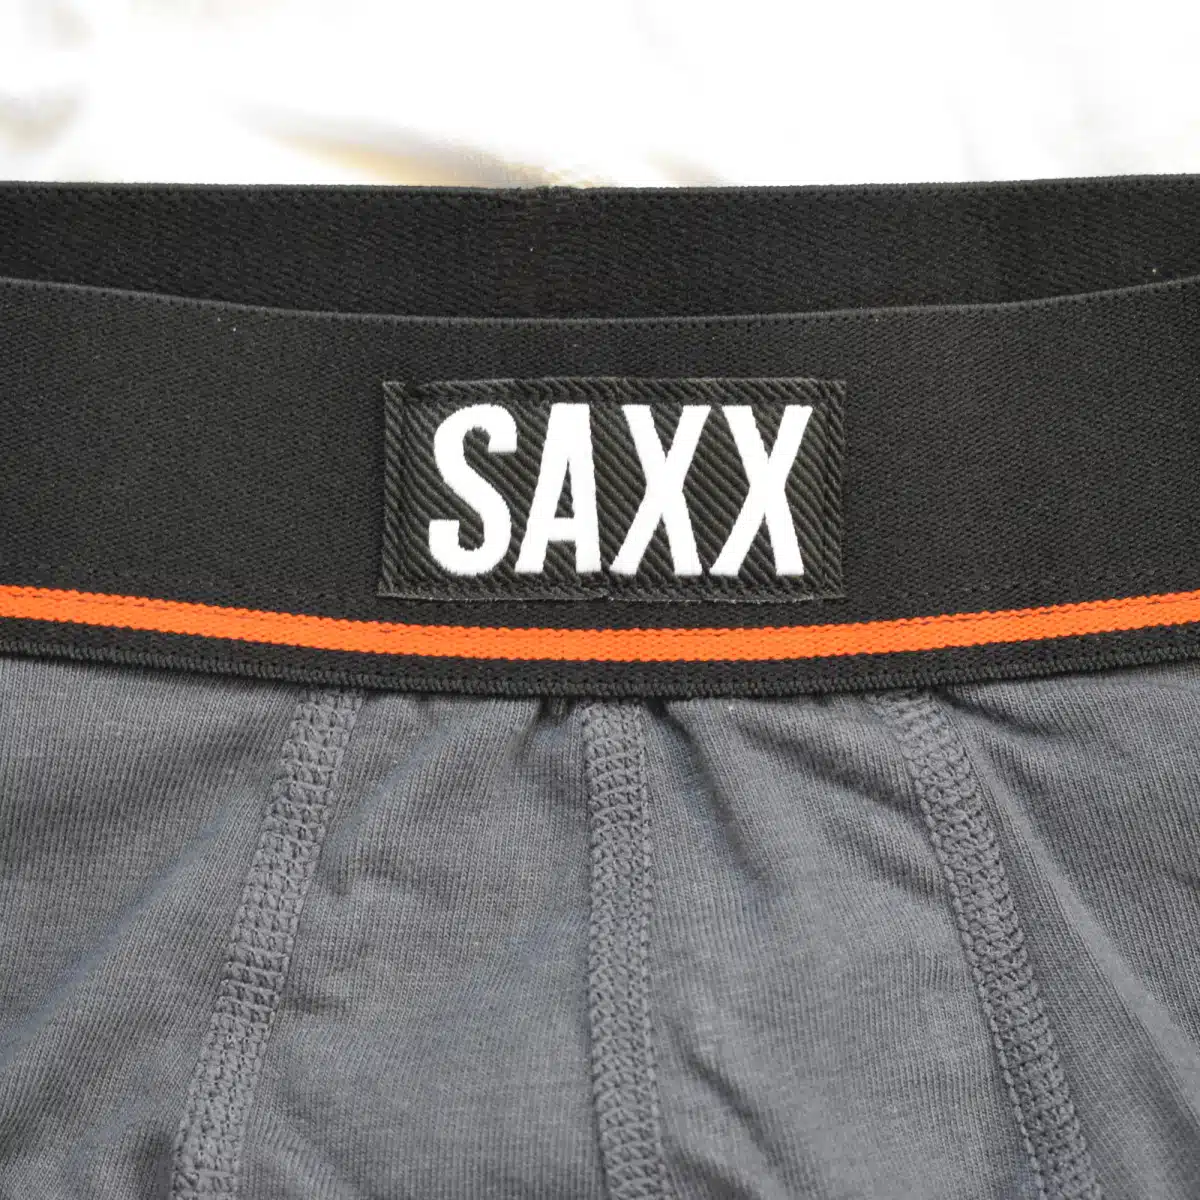 SAXX Underwear Kinetic is now on sale - Clothing Obsession